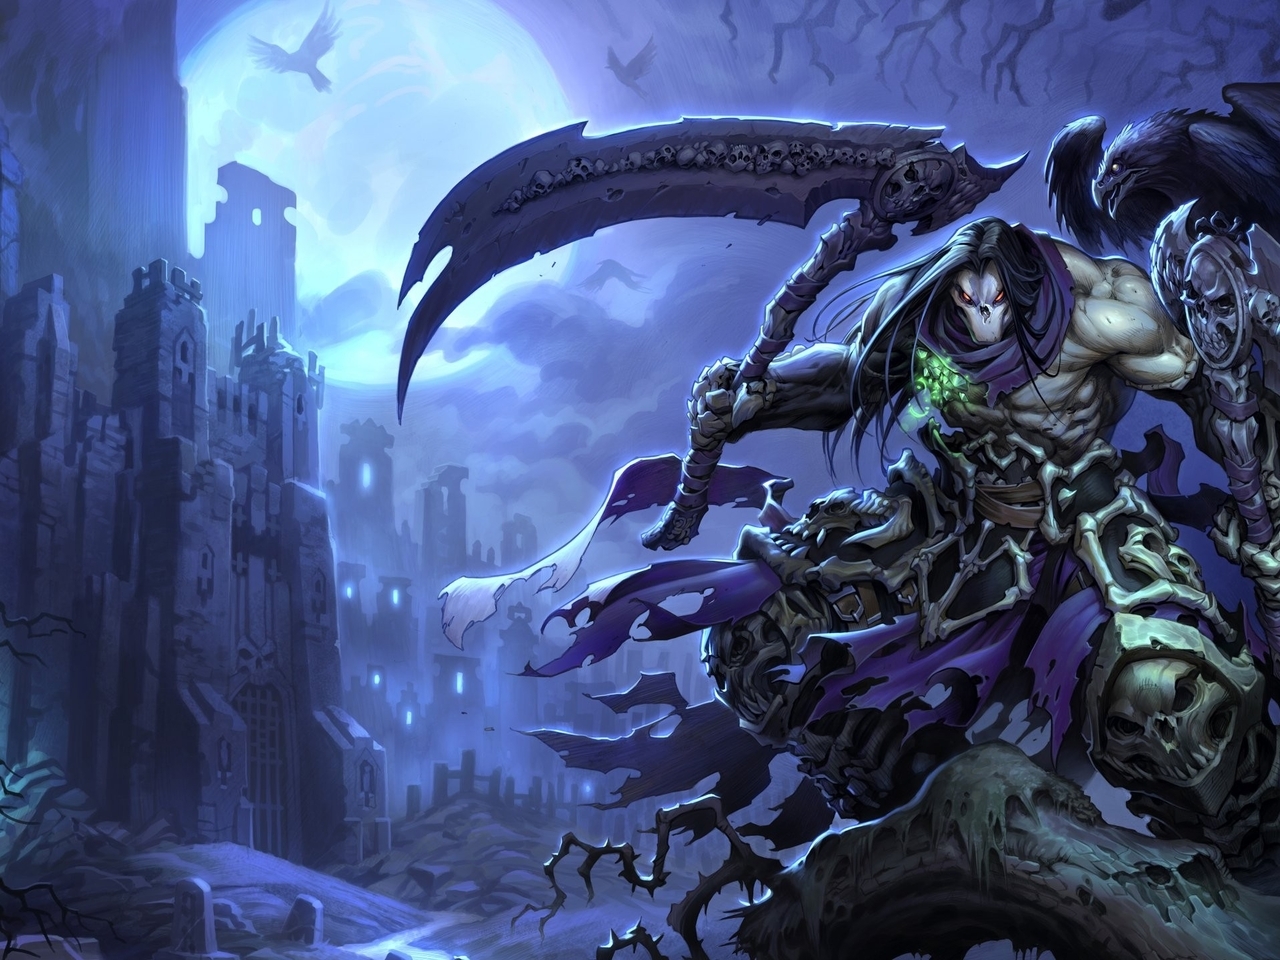 Image: Darksiders 2, Death, skull, scythes, crows, branches, castle, moon